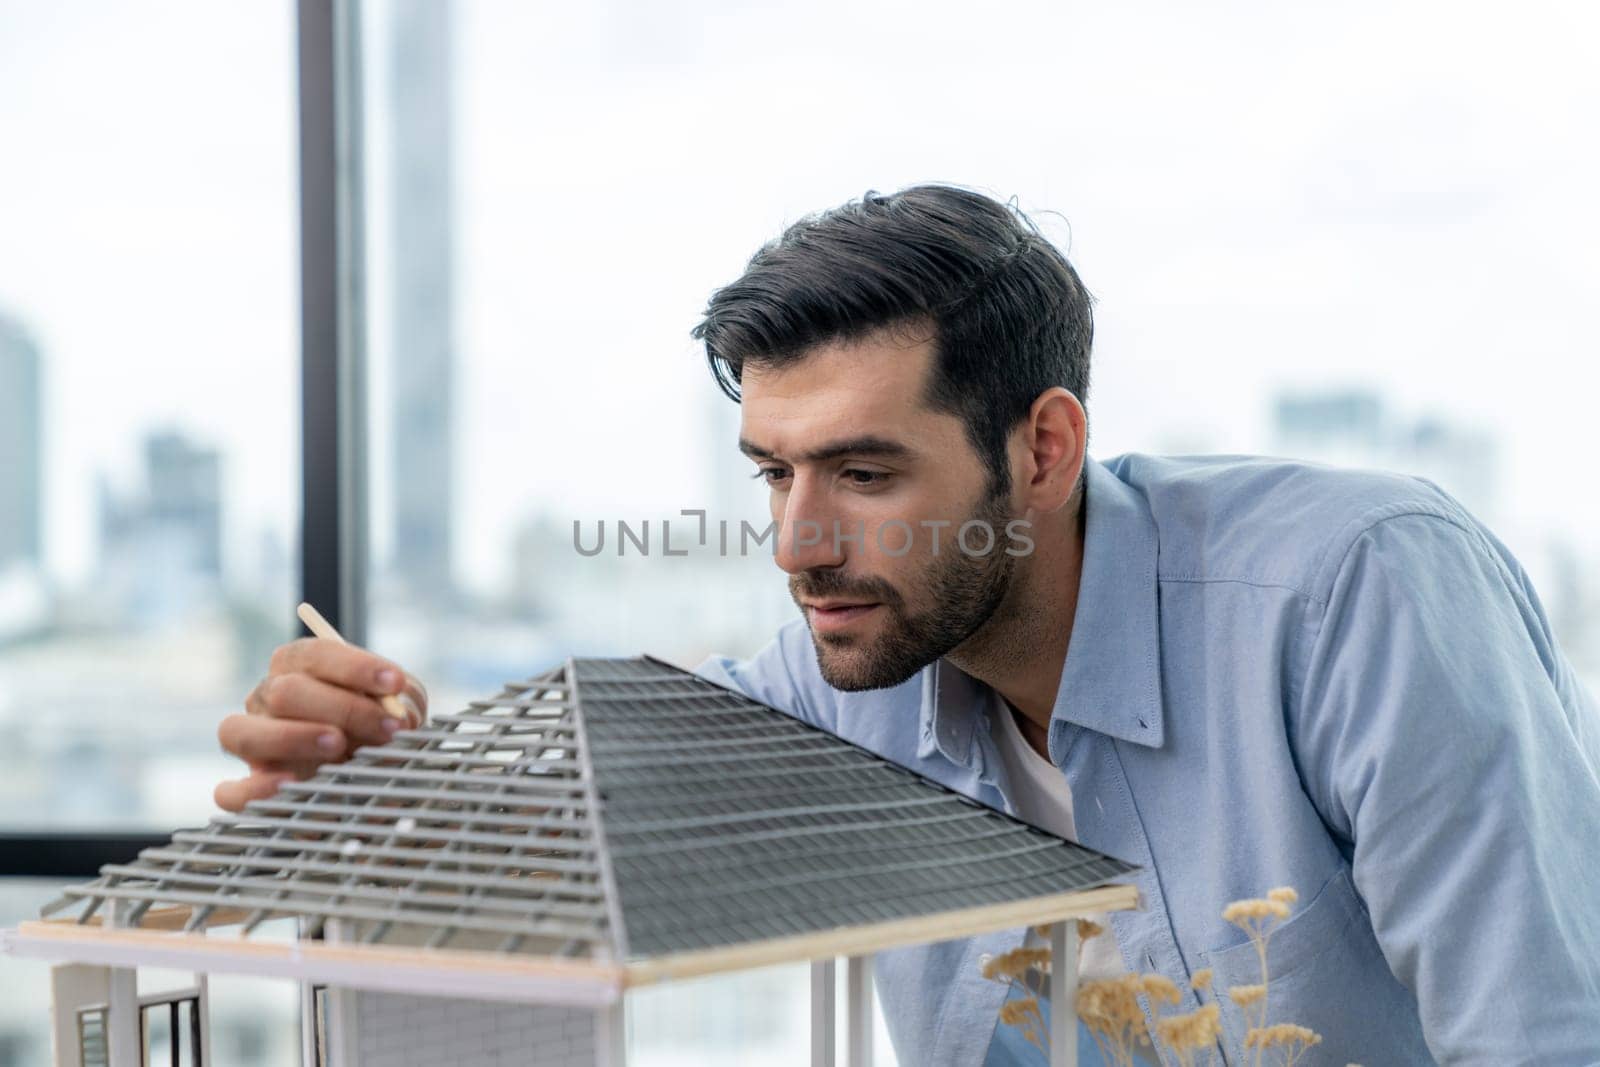 Attractive smart civil engineer measure house model roof construction. Professional architect in casual outfit looking at house model while planing building structure. Skyscraper view. Tracery.